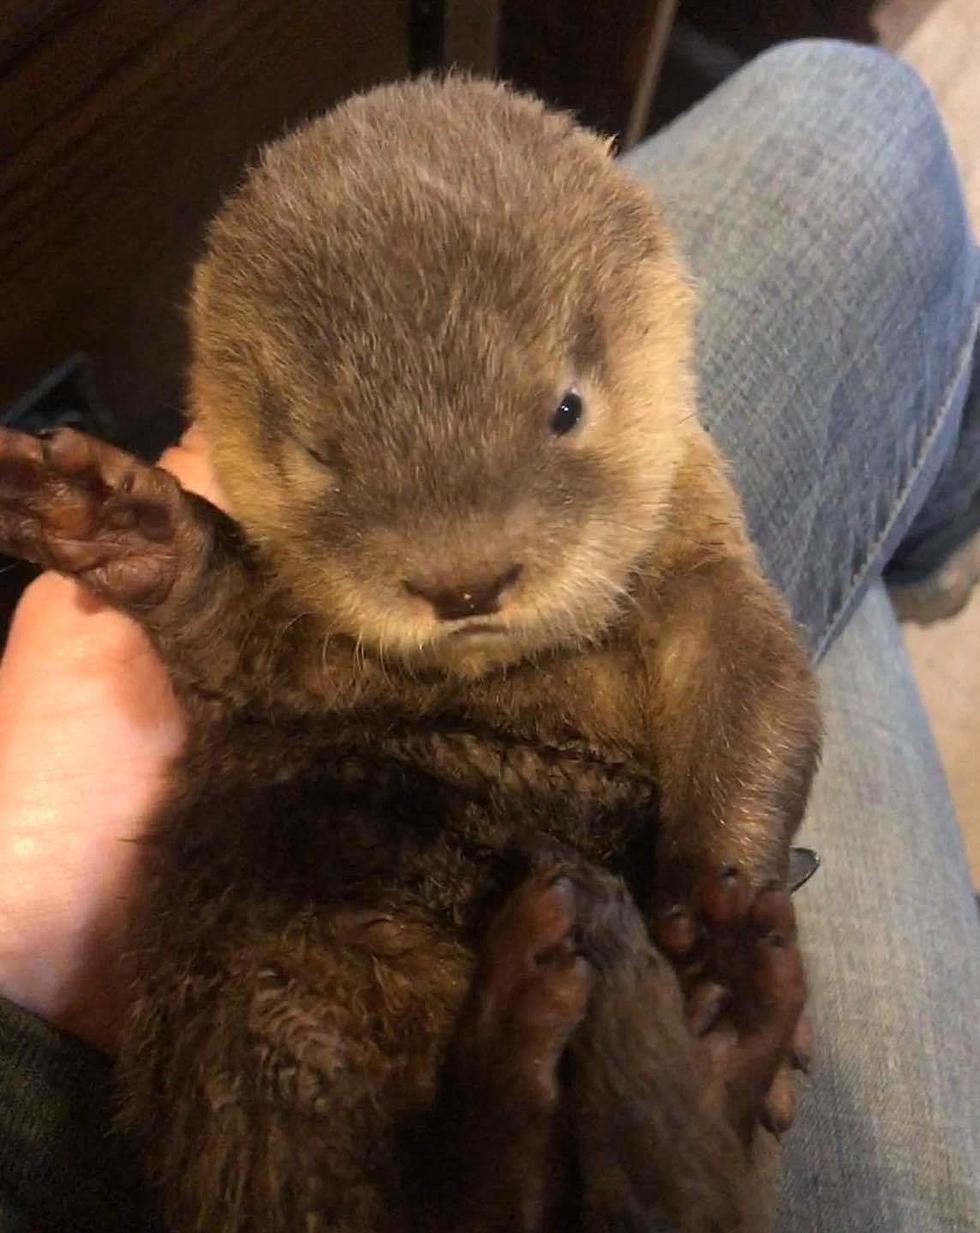 Snuggle Up With Two New Baby Otters at The Wild Animal Park